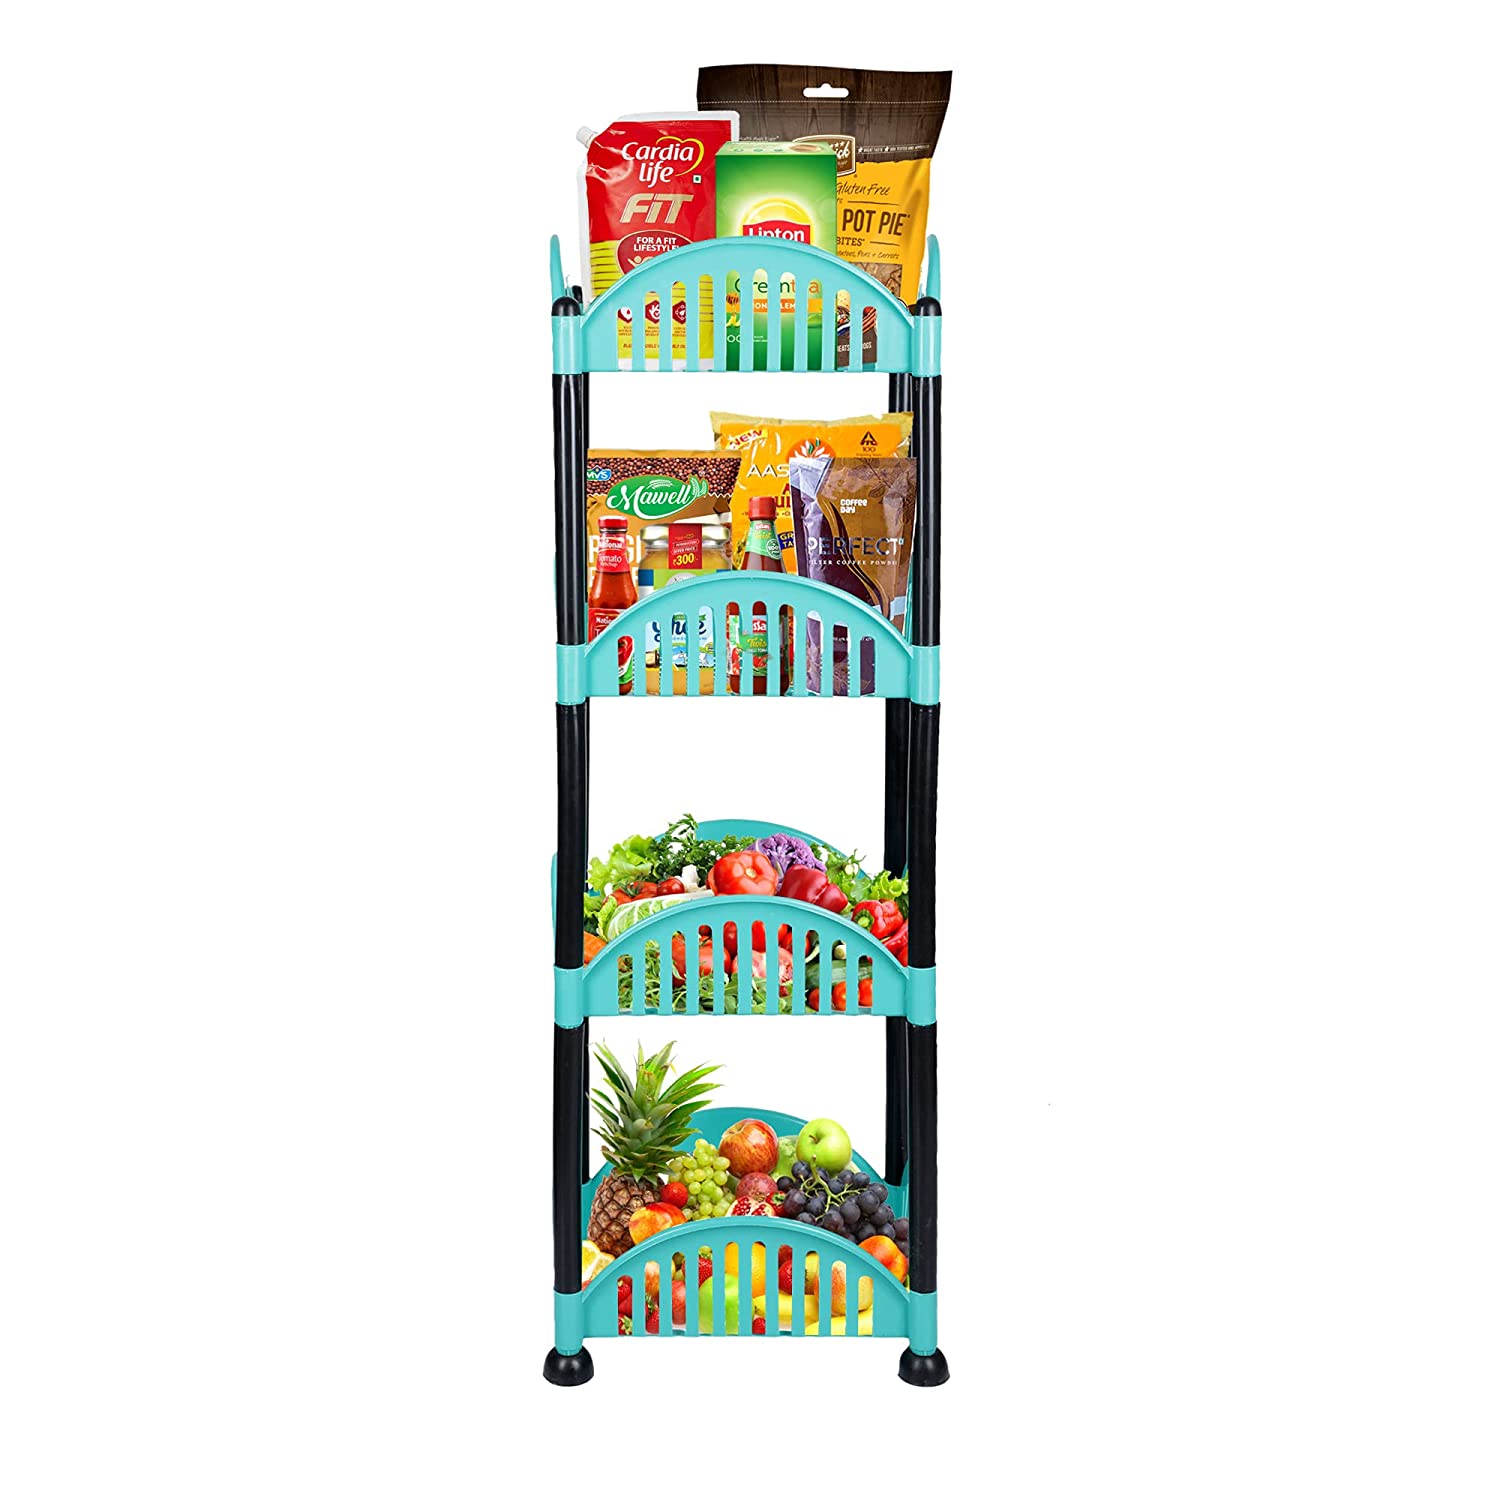 Cutting EDGE Premium Eco-Plastic Shelf Rack 32x23 CM - 4 Layer, For Kitchen & Office Use, Fruits, Vegetables, Onion, Sabji Tier Basket Tray & Stand, Multipurpose Use for Home, Cosmetics Super Sturdy Organizer Storage